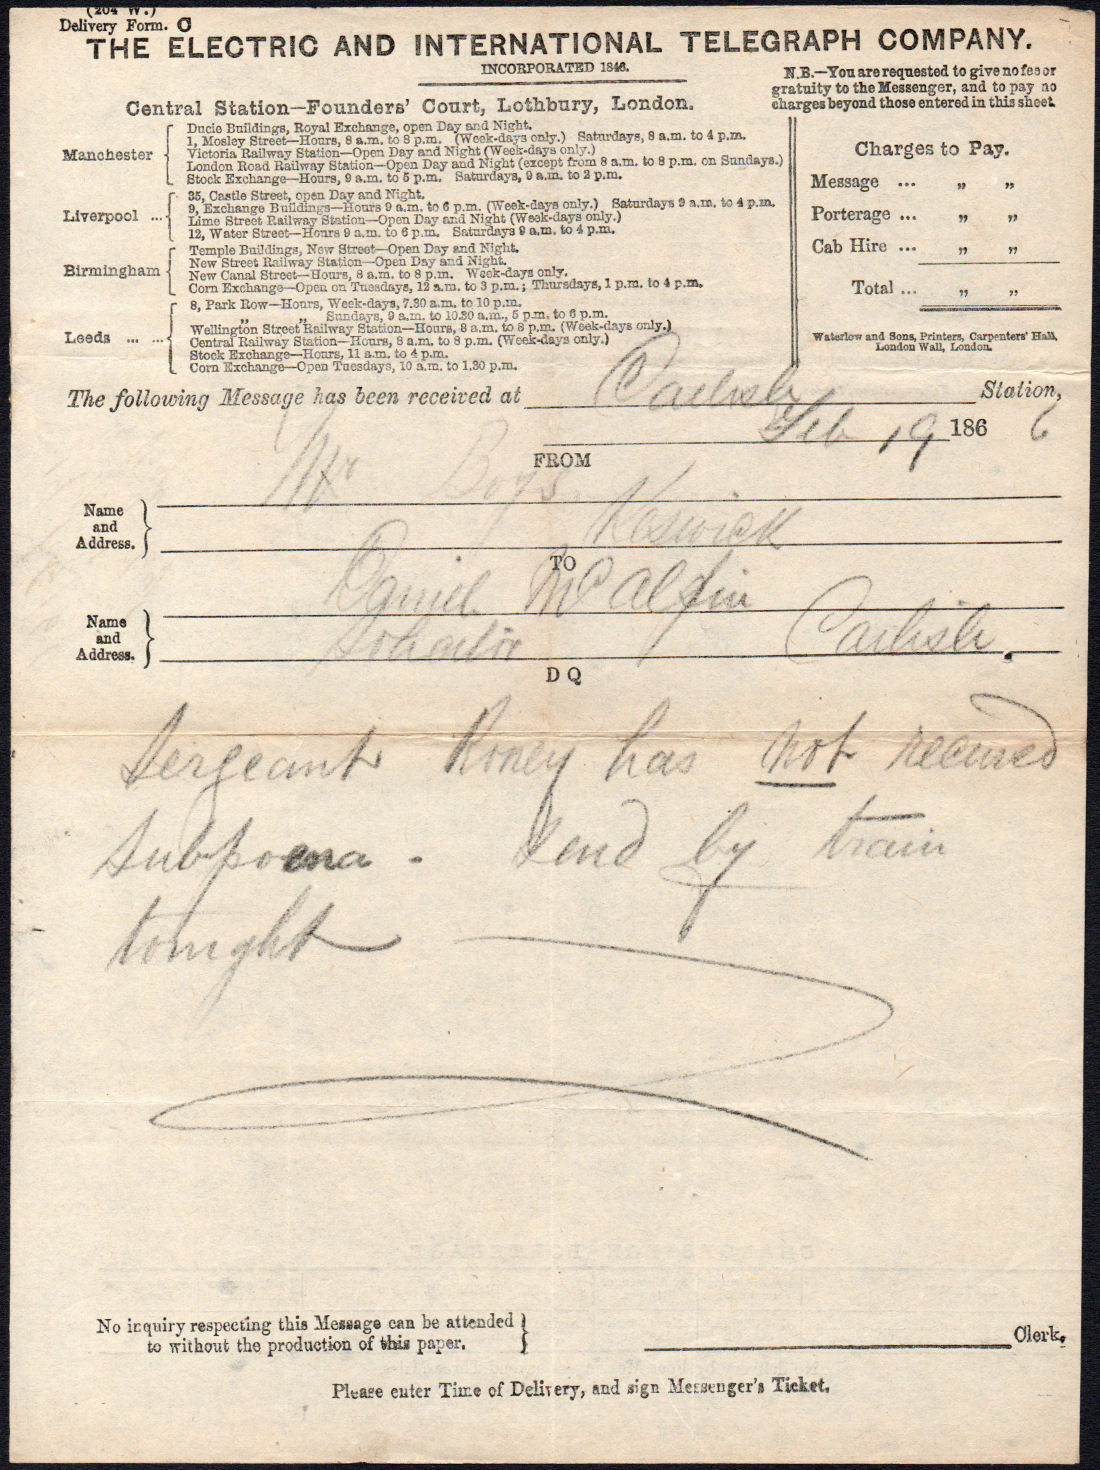 Electric Telegraph Company Form C - front.